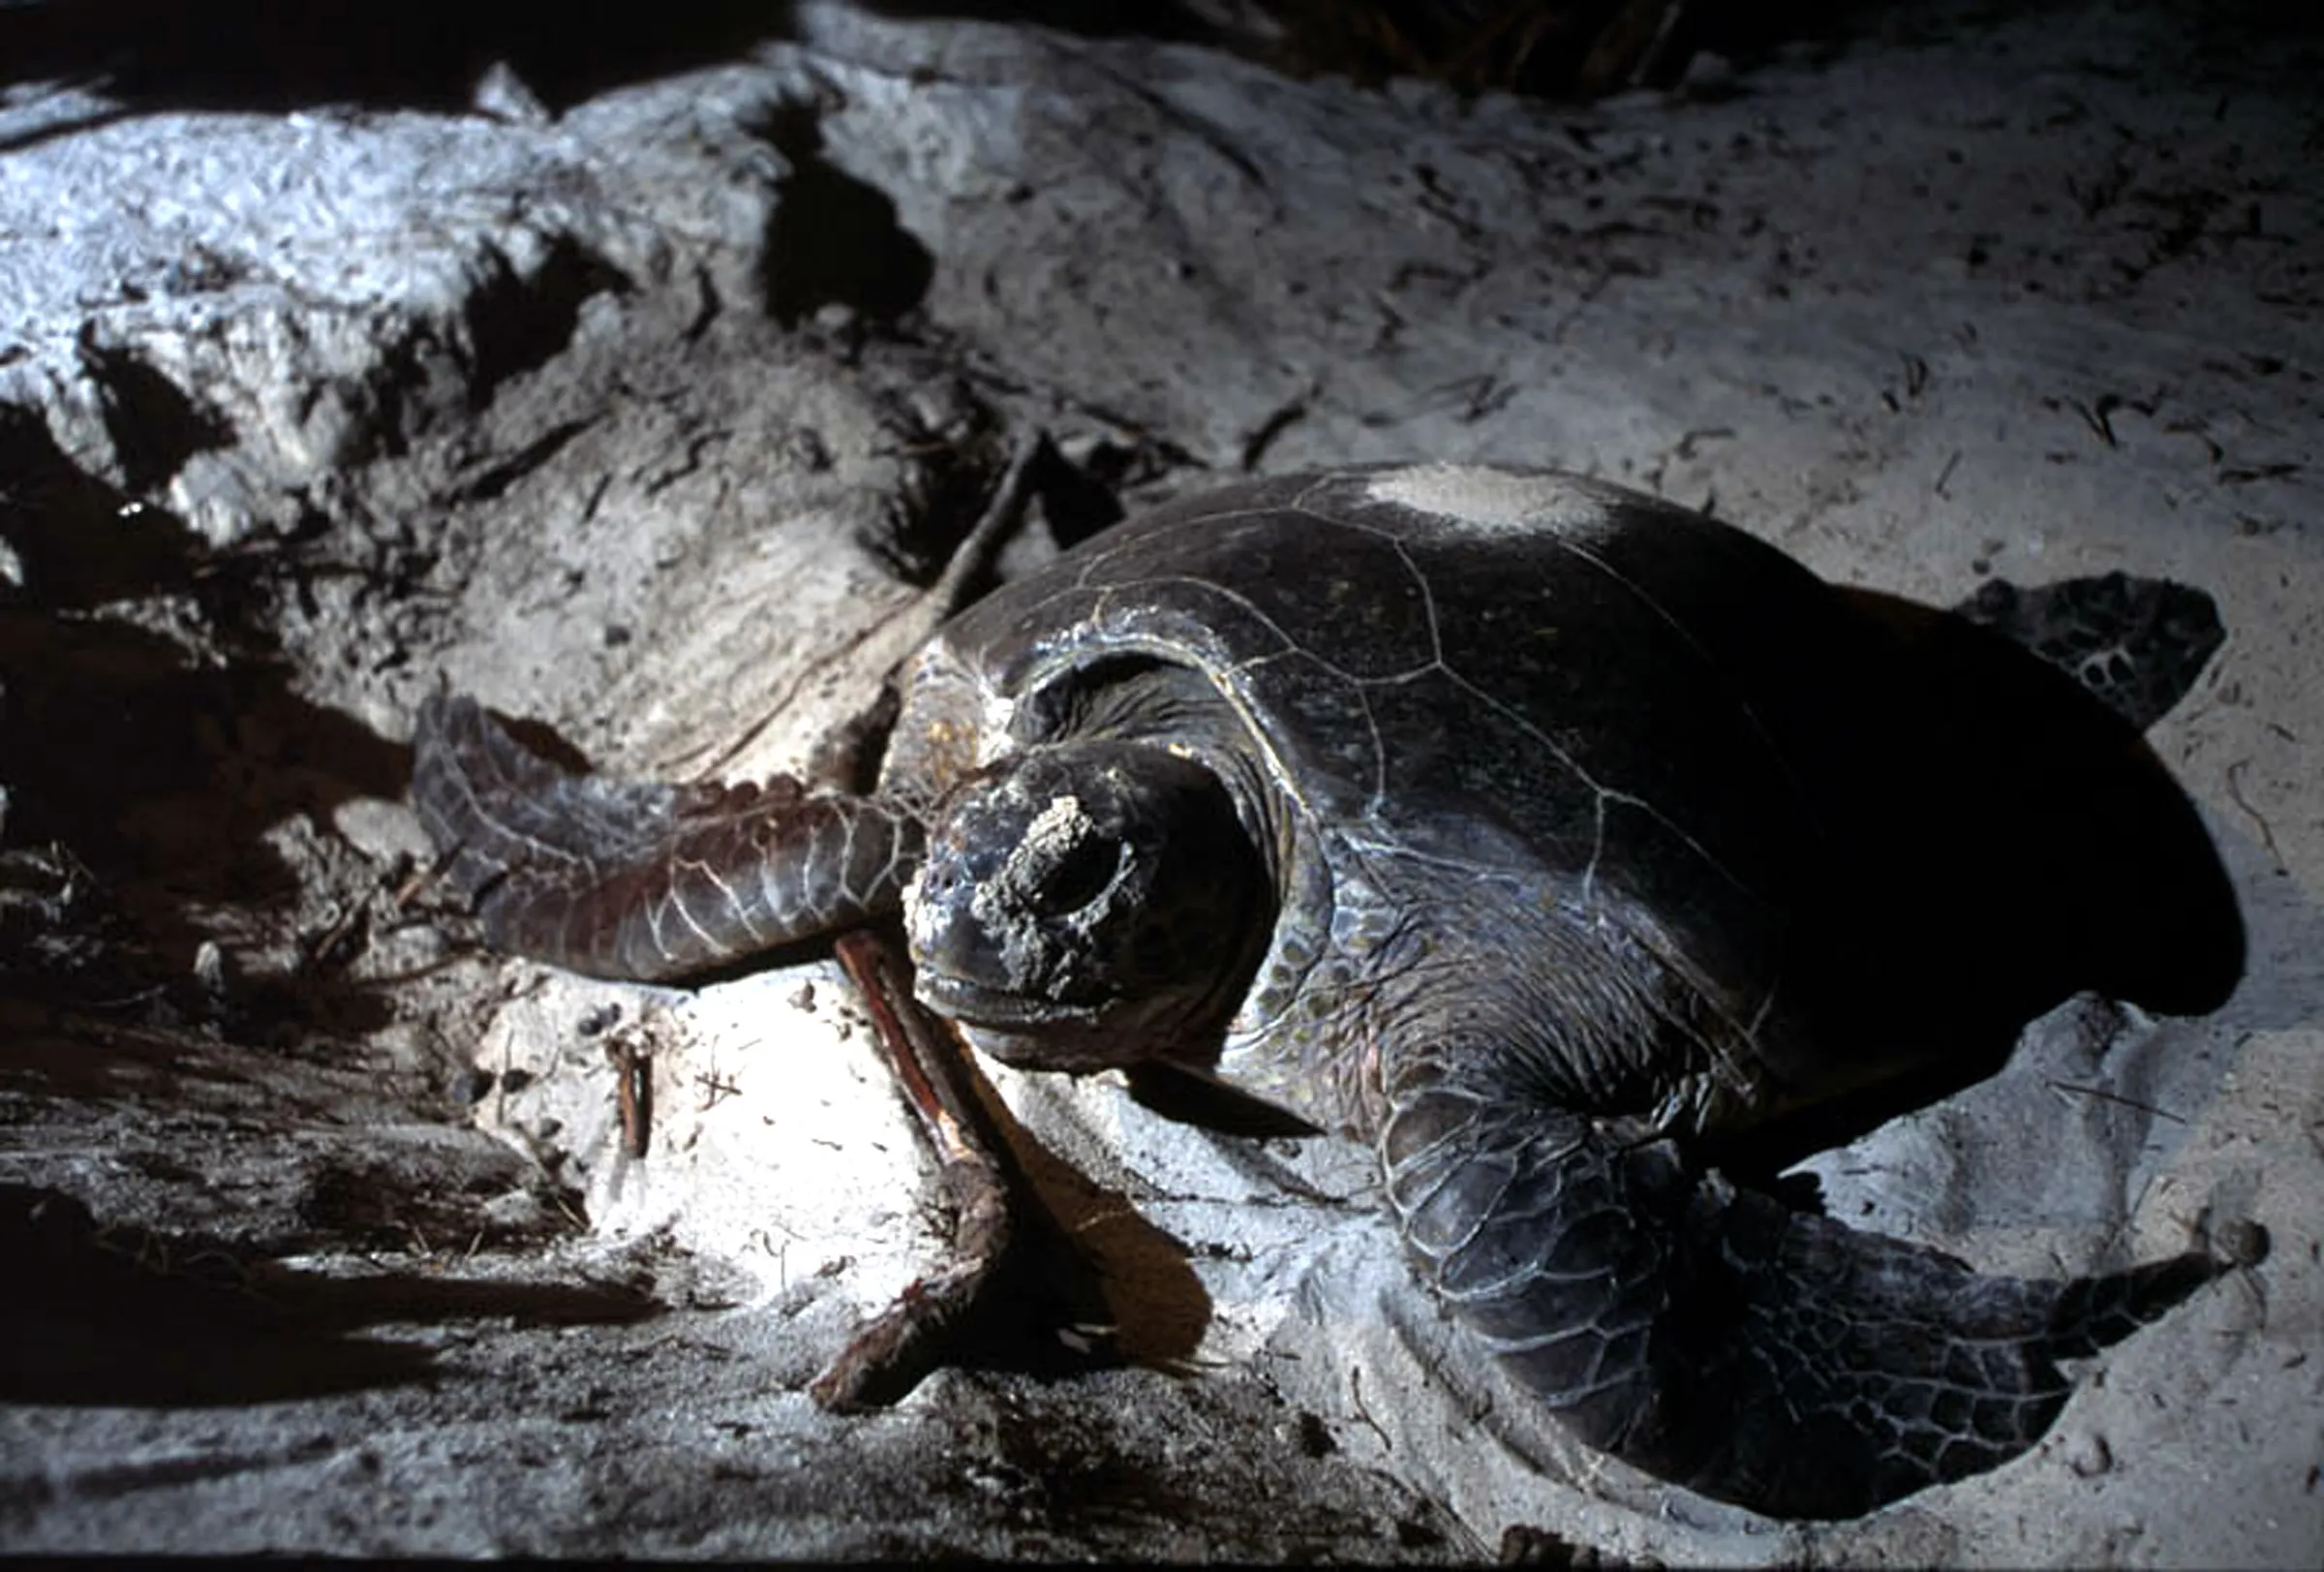 A giant tortoise nests on Aldabra, the world's largest raised coral atoll in the Indian Ocean. REUTERS/Handout